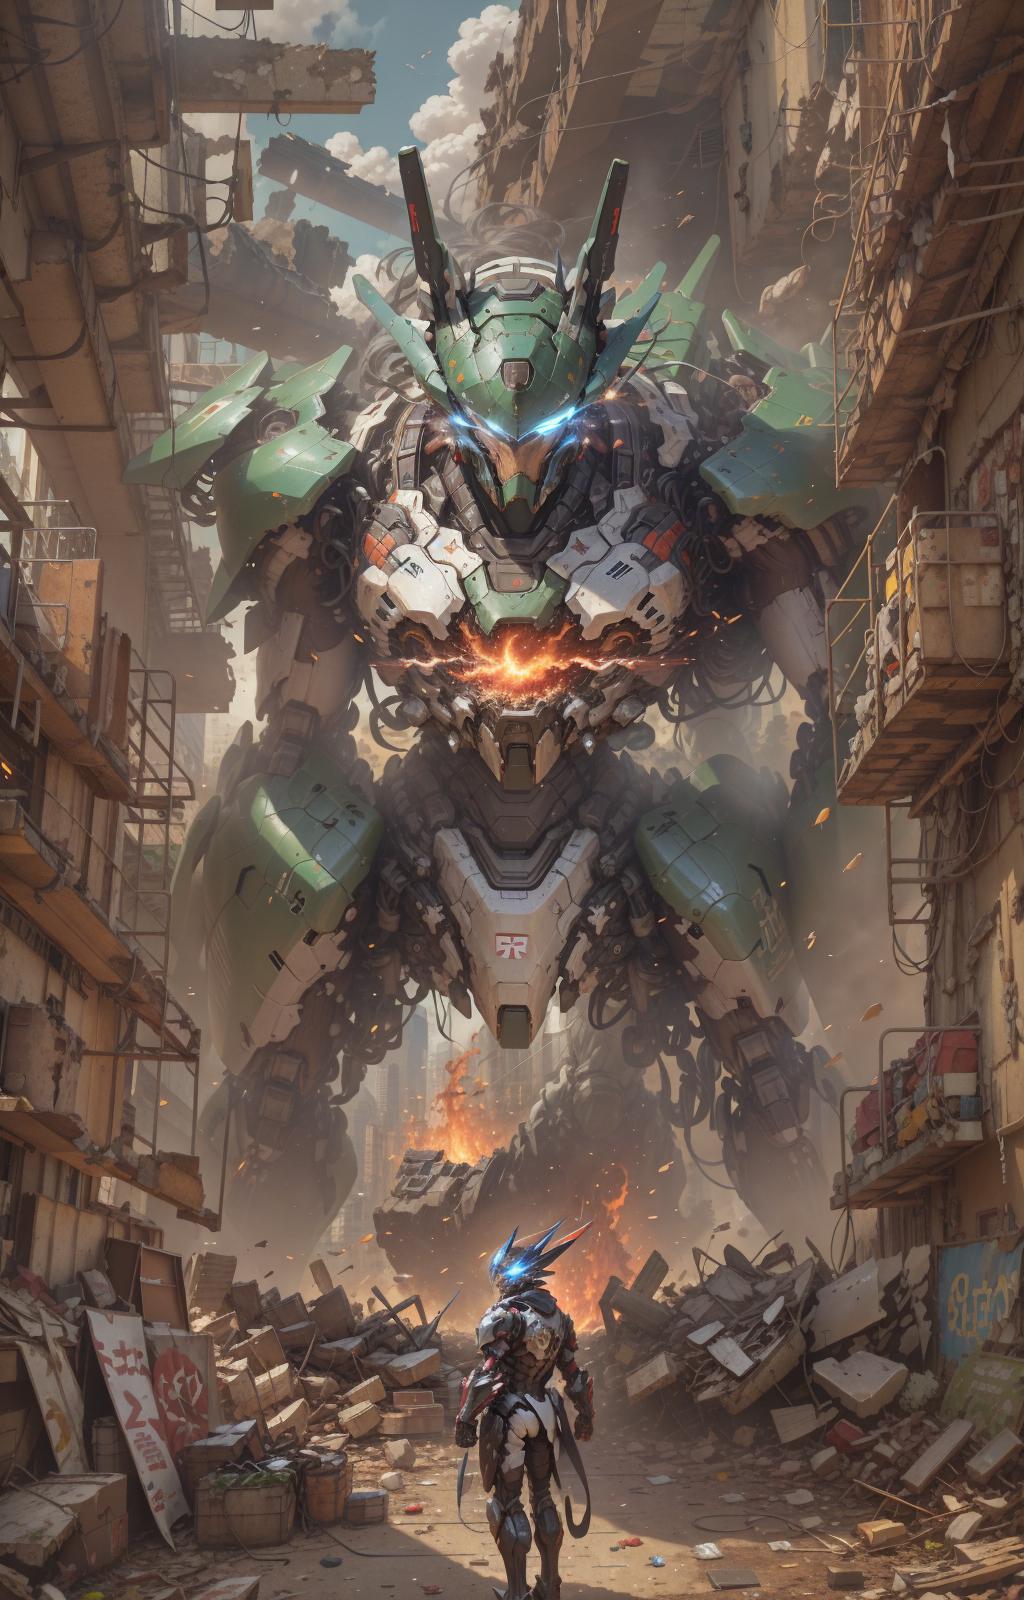 A giant green robot rises above a cityscape, with a smaller robot standing nearby.